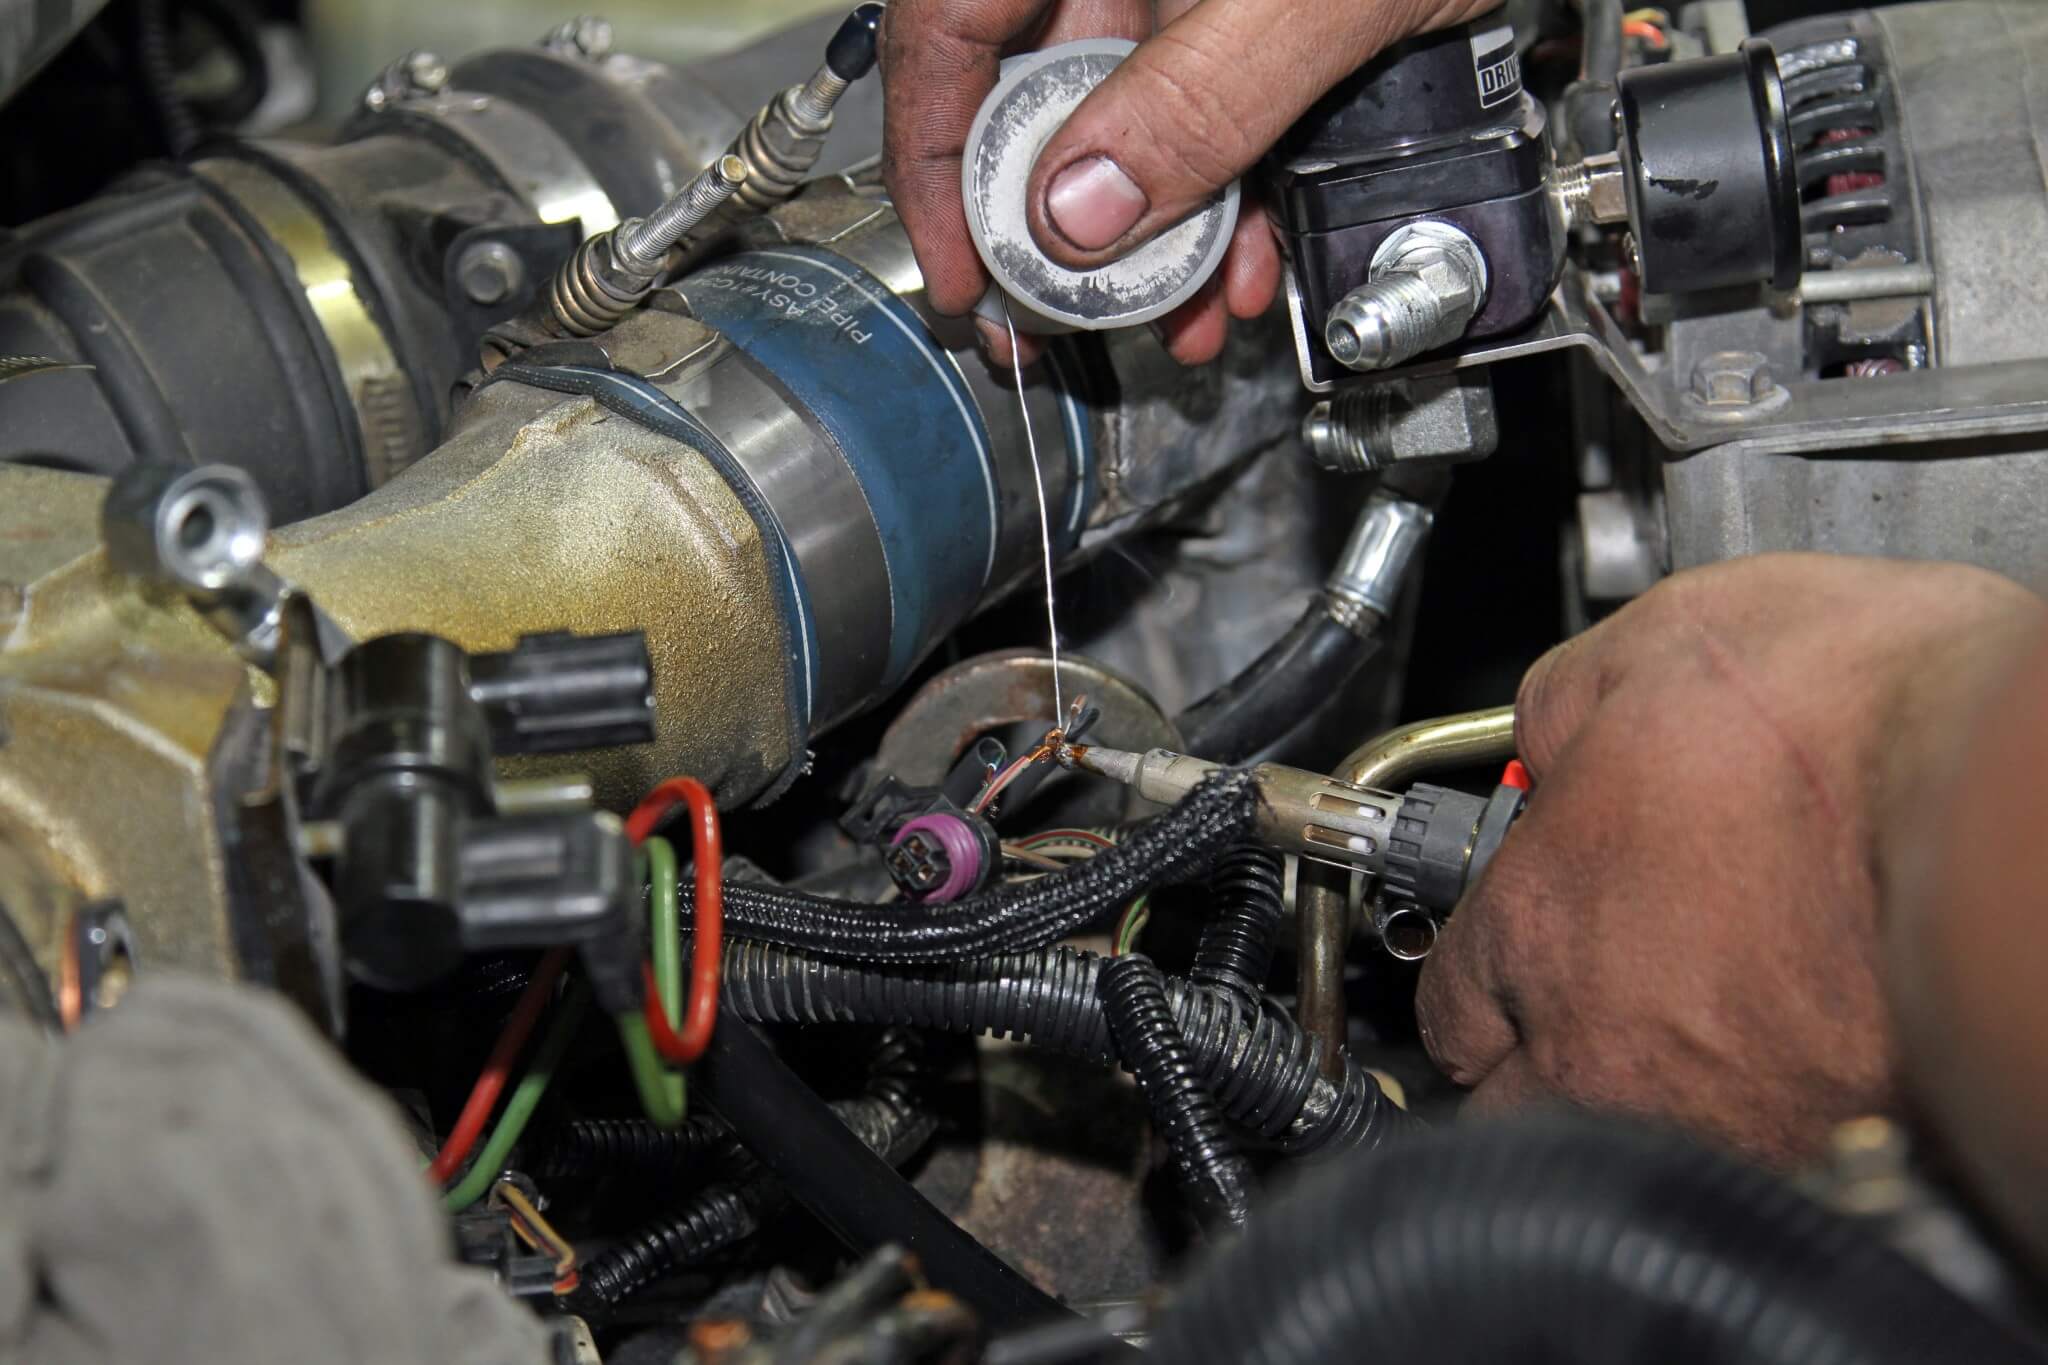 19. Like the rest of the gauge installation, Carter solders and then seals the joints with heat-shrink tubing for a secure connection of the HPOP gauge harness under the hood. A cheap connector could corrode and develop a poor connection over time.